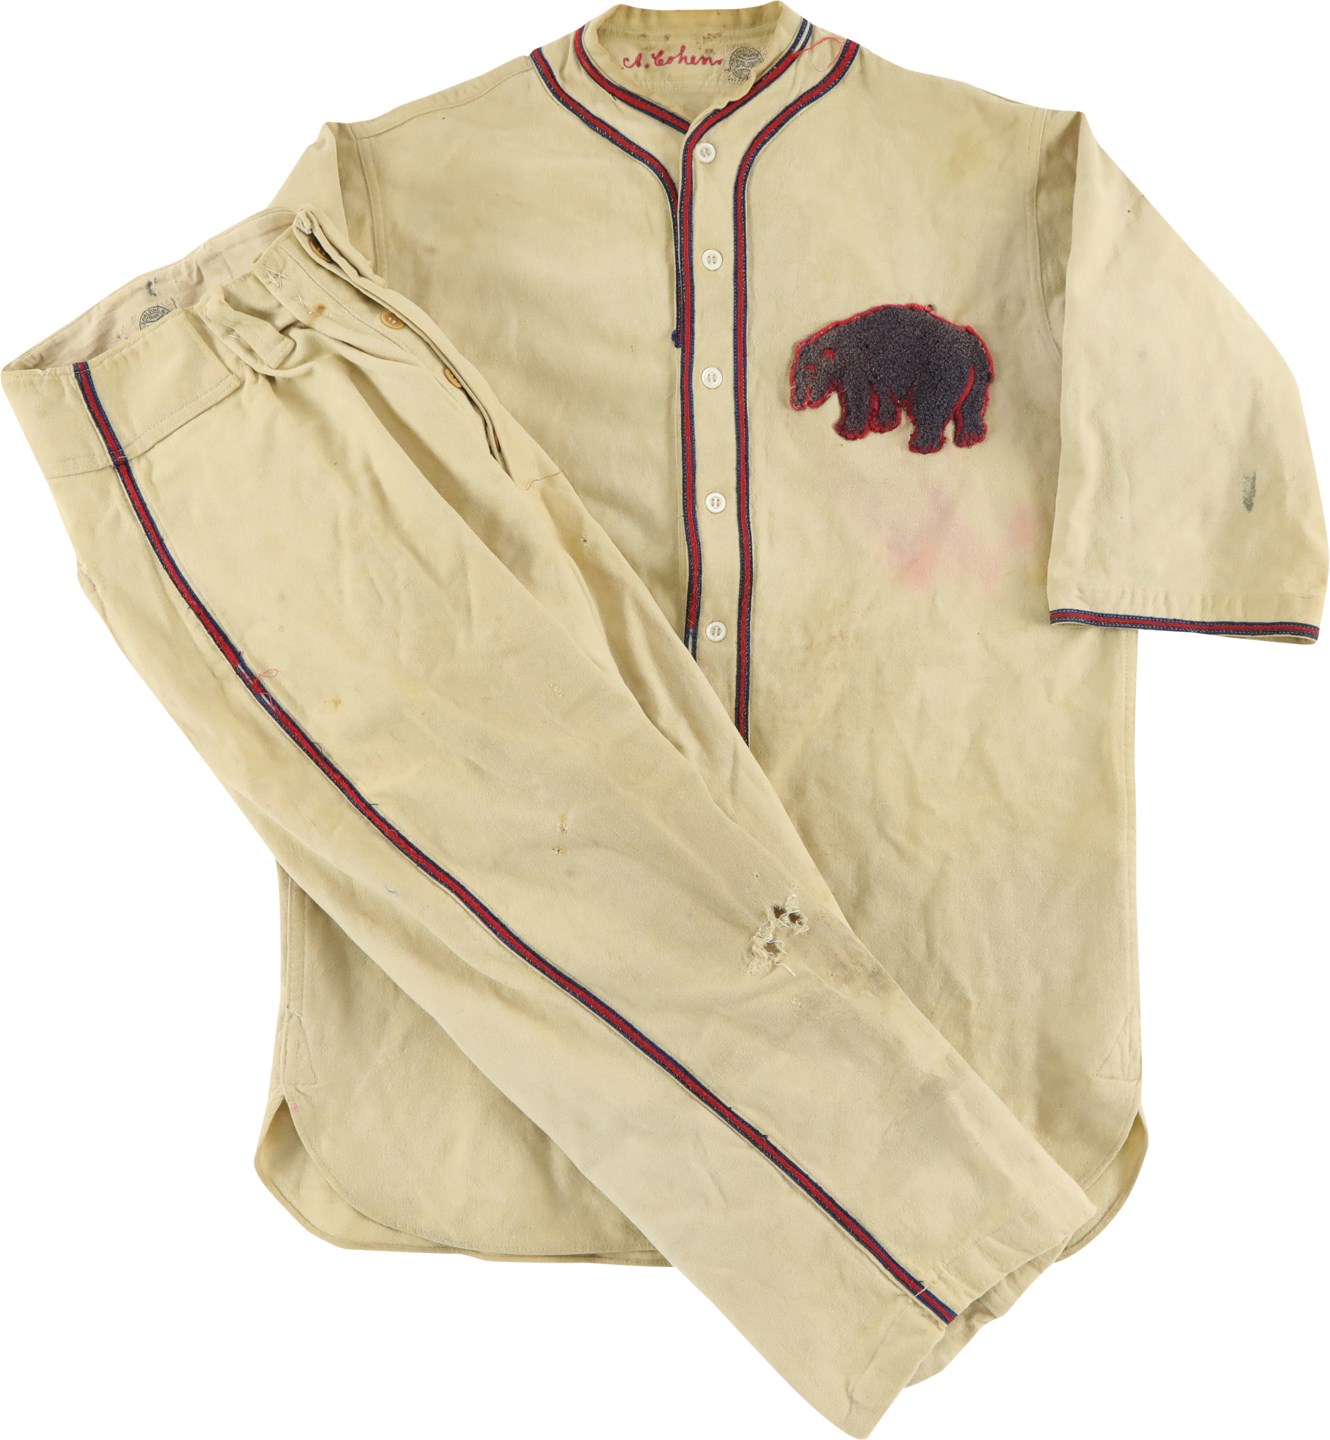 - Circa 1931 Andy Cohen Newark Bears Game Worn Jersey with Pants